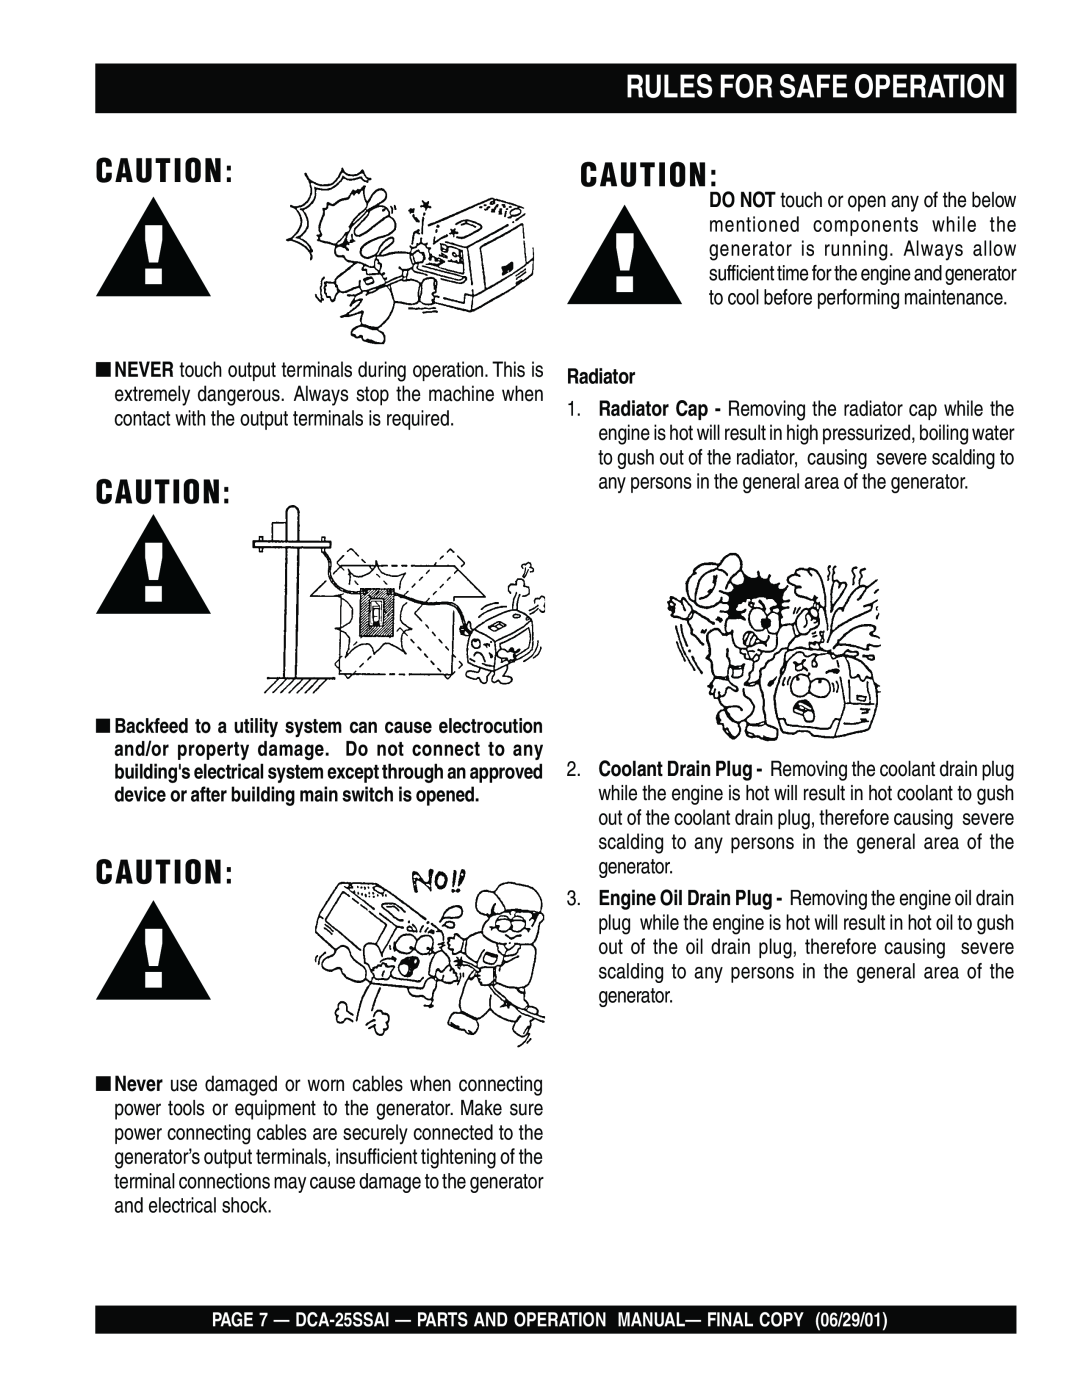 Multiquip DCA-25SSAI operation manual Rules For Safe Operation, Radiator 